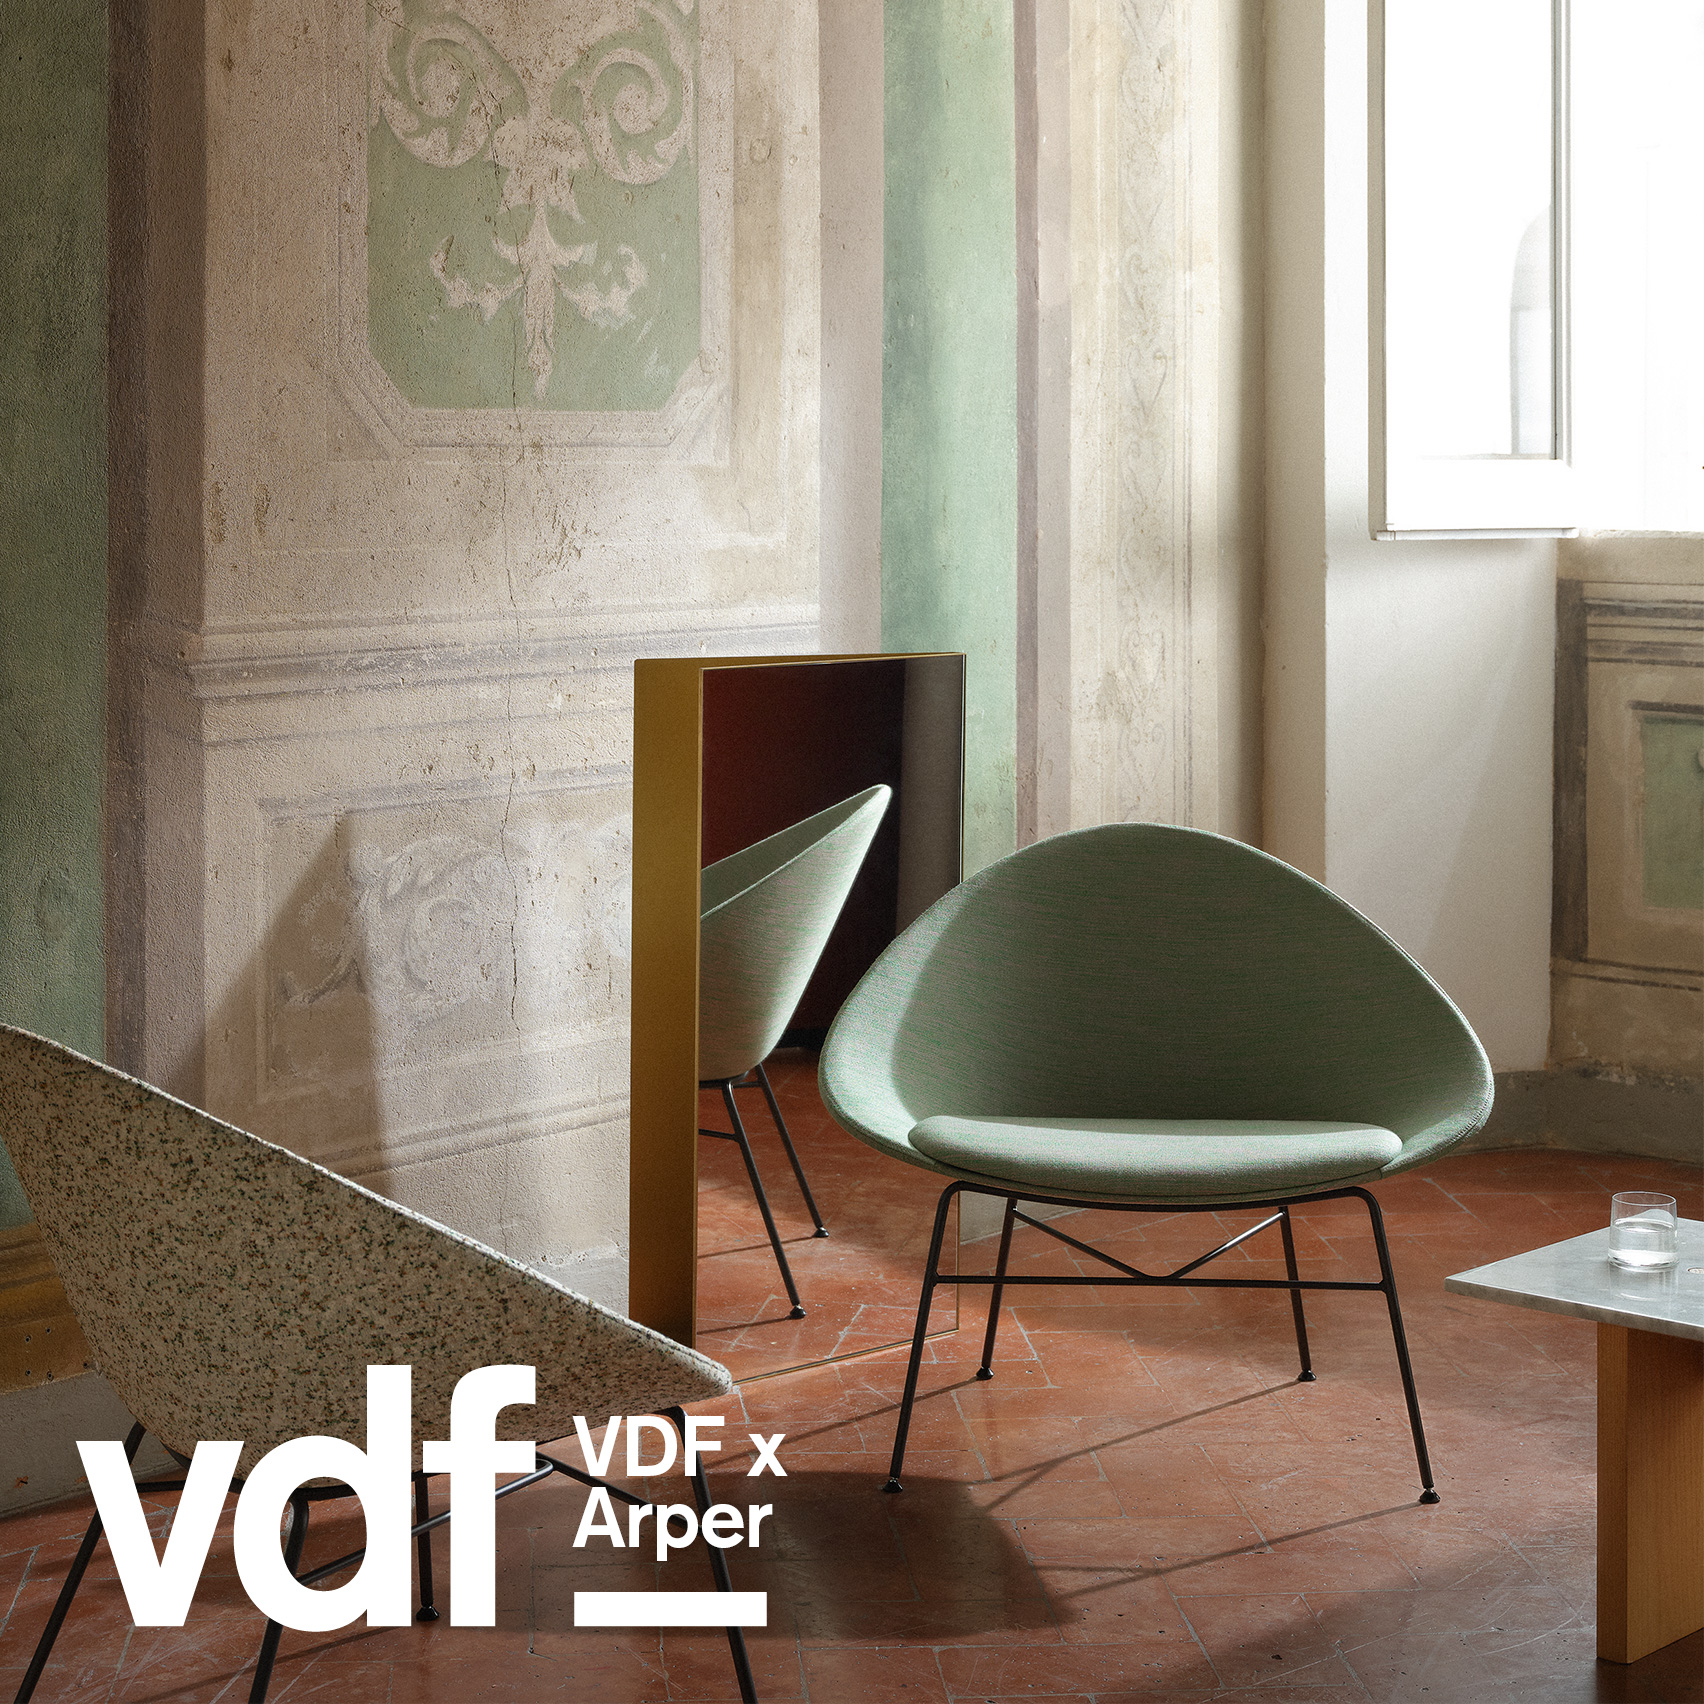 Arper reveals chairs and online for VDF | Dezeen